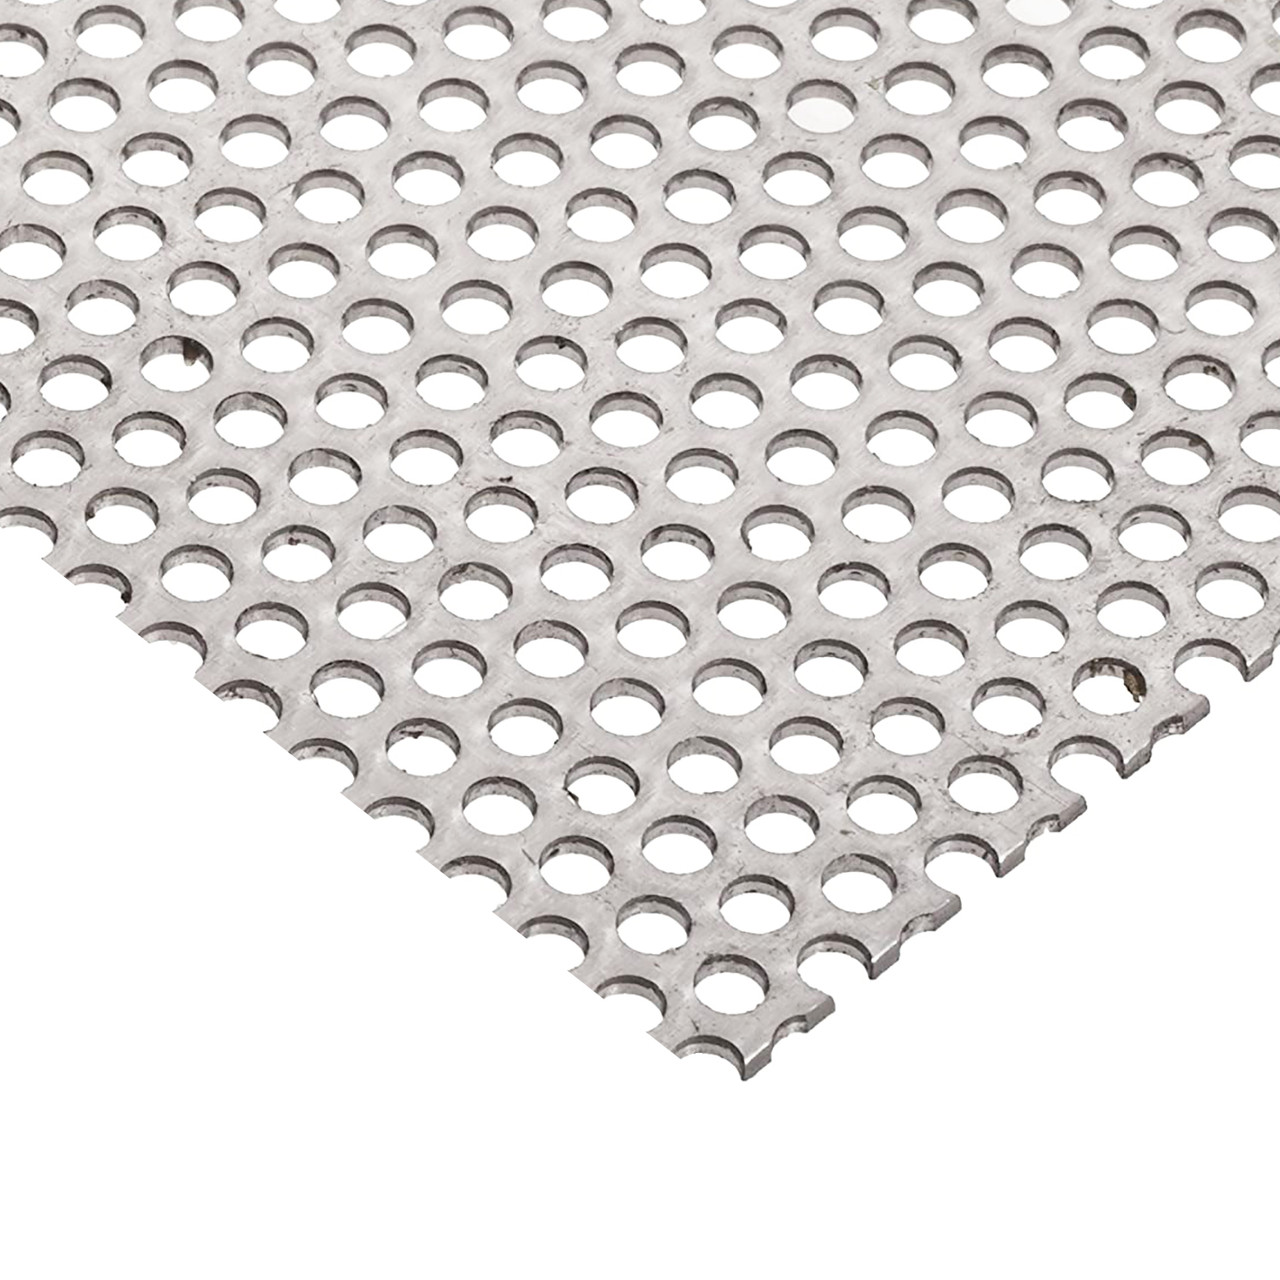 Perforated Metal Sheets,Perforated Stainless Steel Plate,304 Stainless  Steel Metal mesh Plate,Metal mesh for DIY Projects,Used for Ventilation